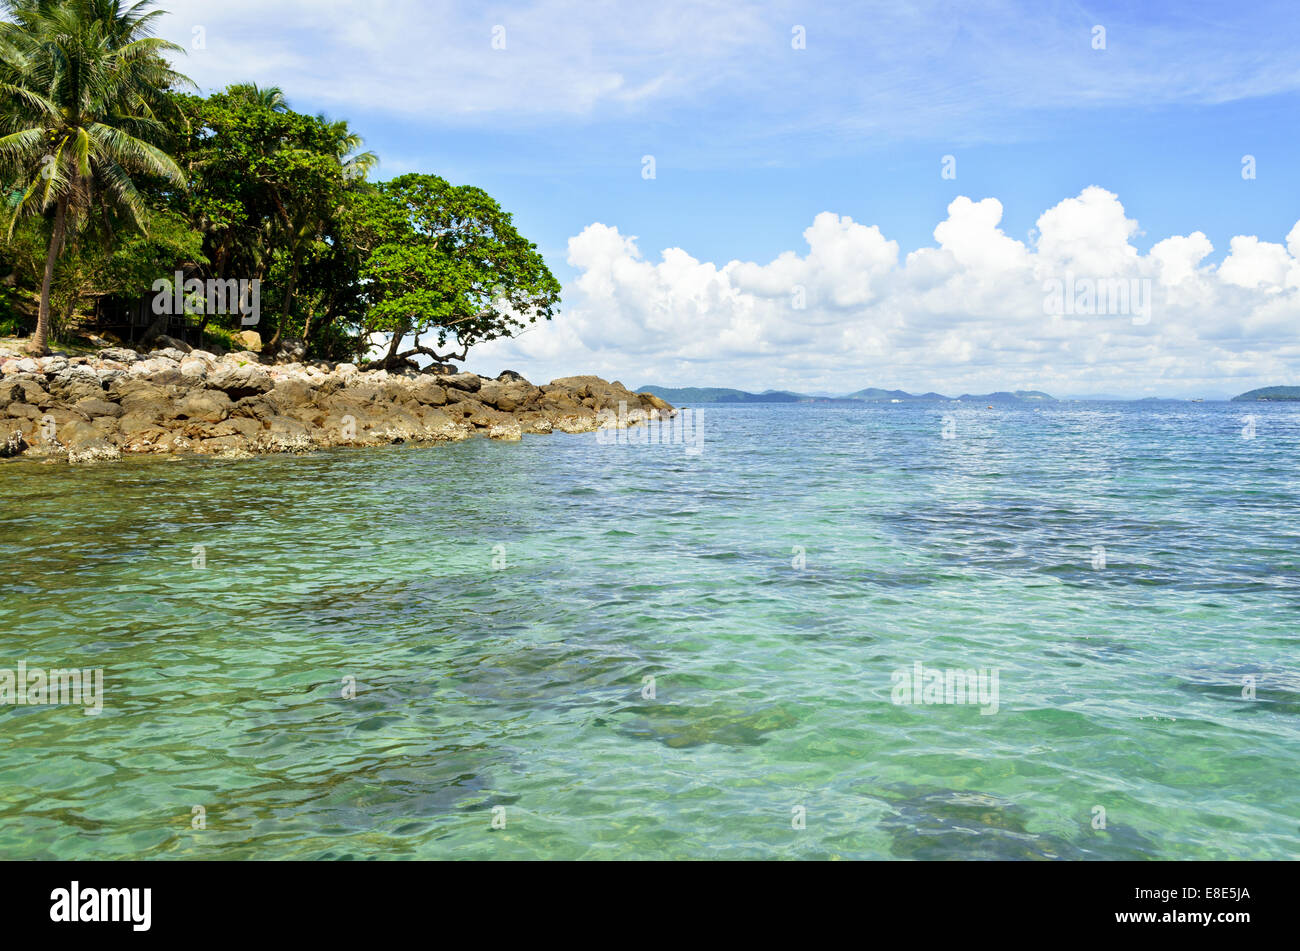 Landscape sea and island on the bright sky in summer, Coast ideal for diving of Chumphon Province,Thailand Stock Photo